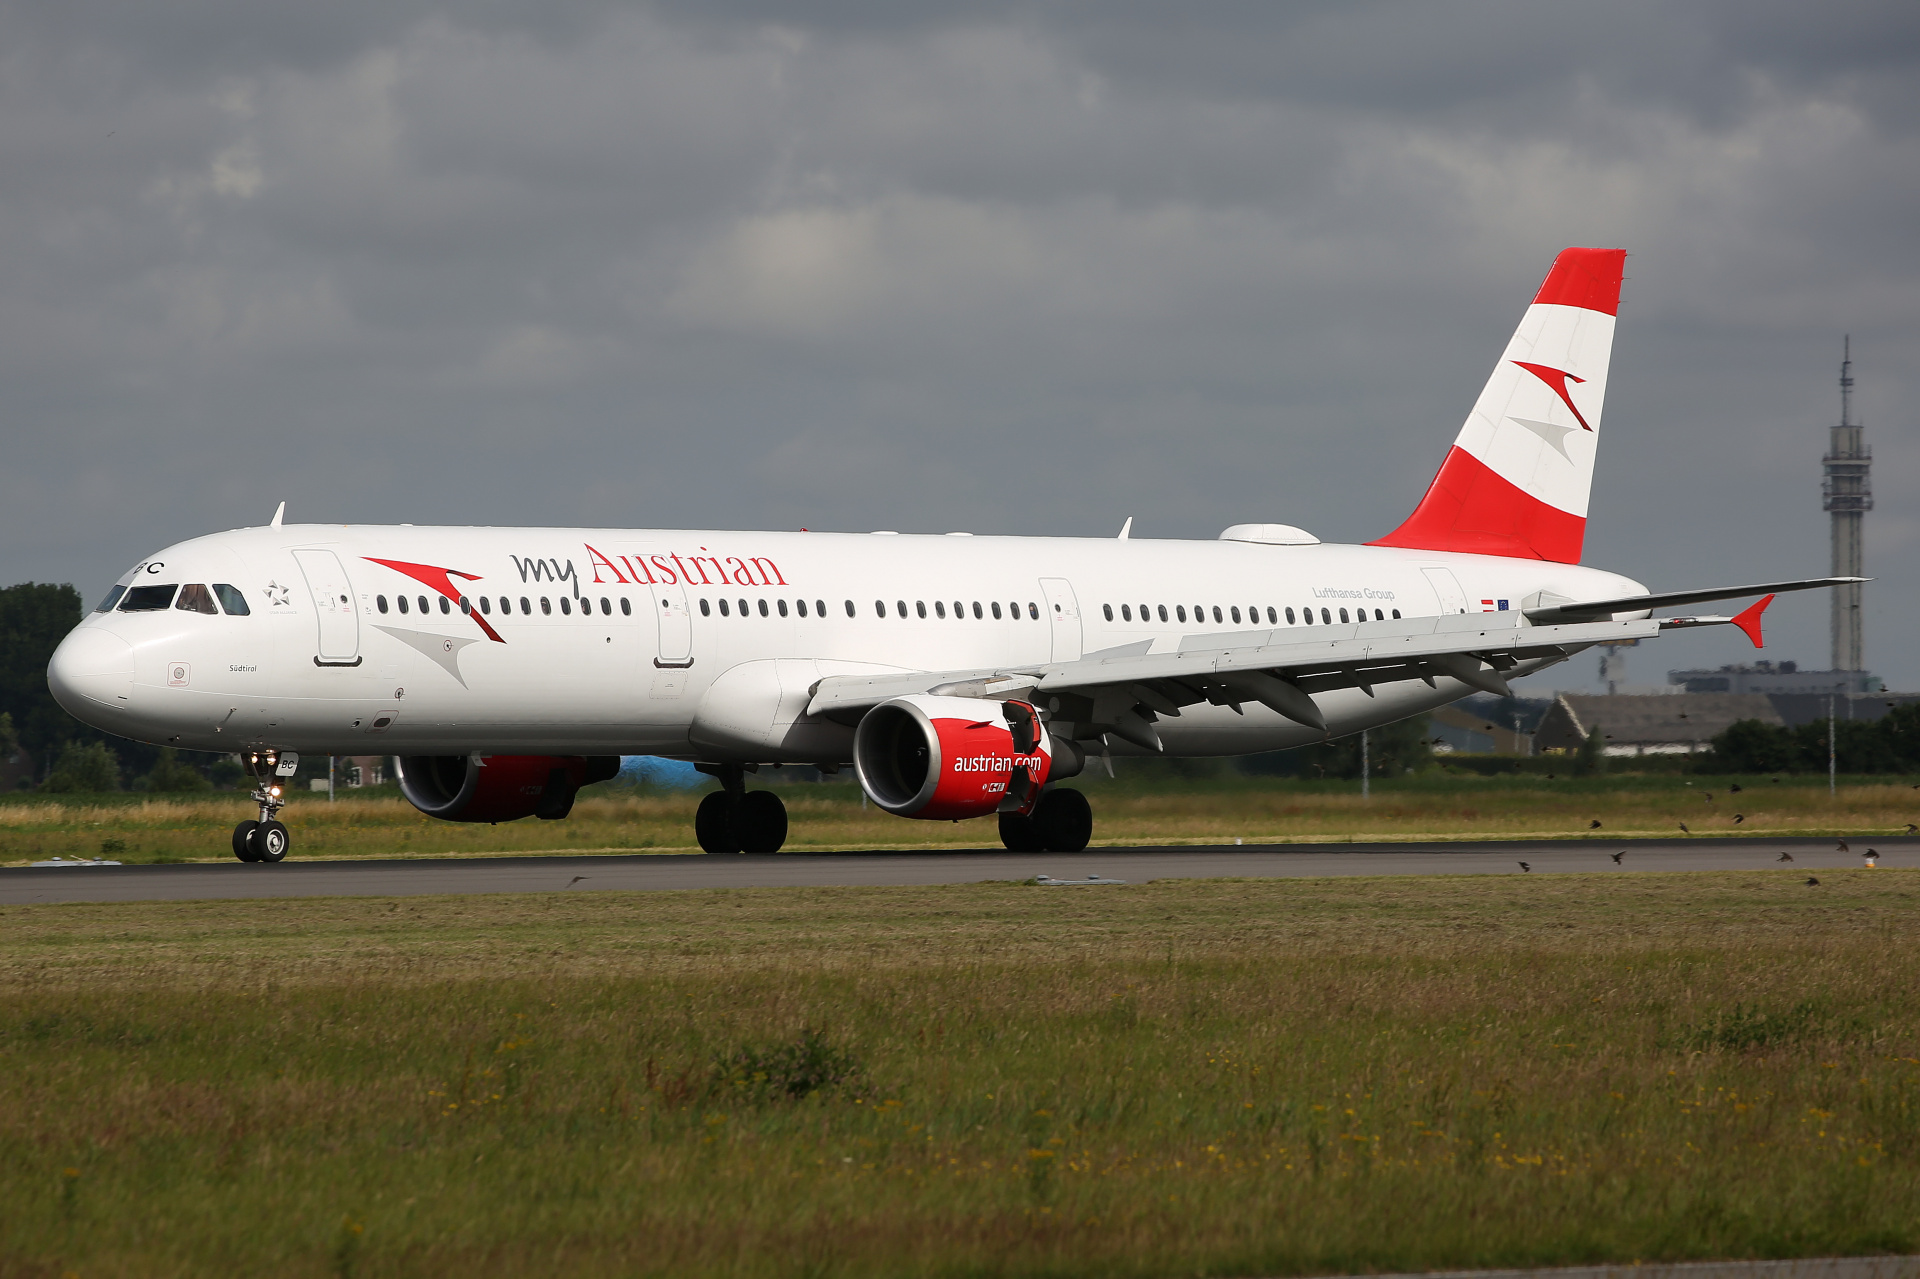 OE-LBC, Austrian Airlines (Aircraft » Schiphol Spotting » Airbus A321-100)